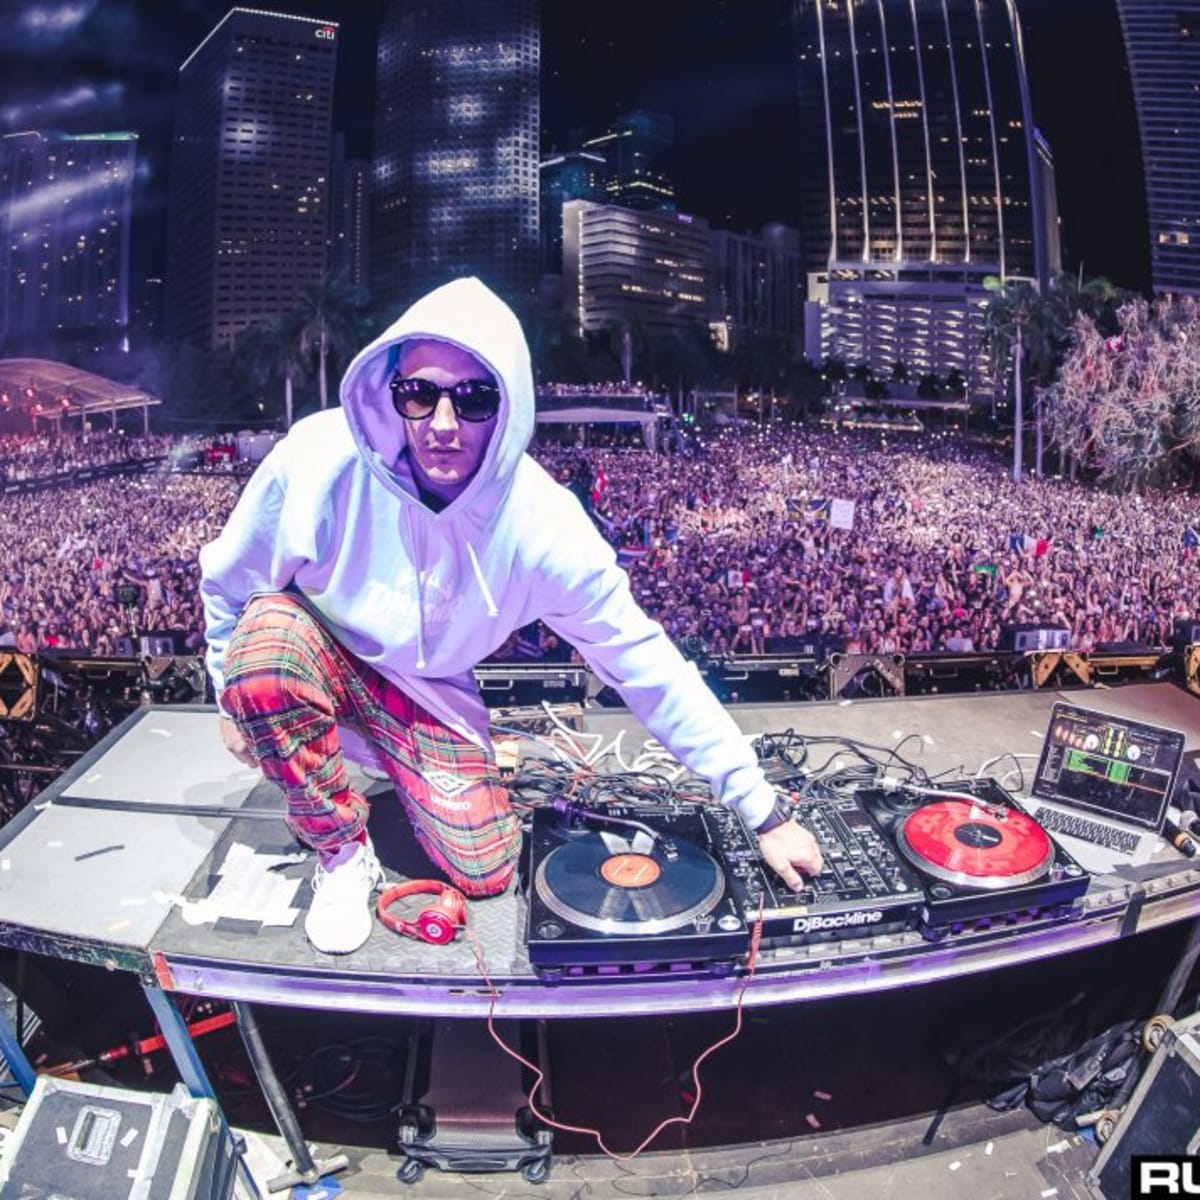 Dj Snake Threw Down Unreleased Music During A Record Setting Wall Of Death Edm Com The Latest Electronic Dance Music News Reviews Artists